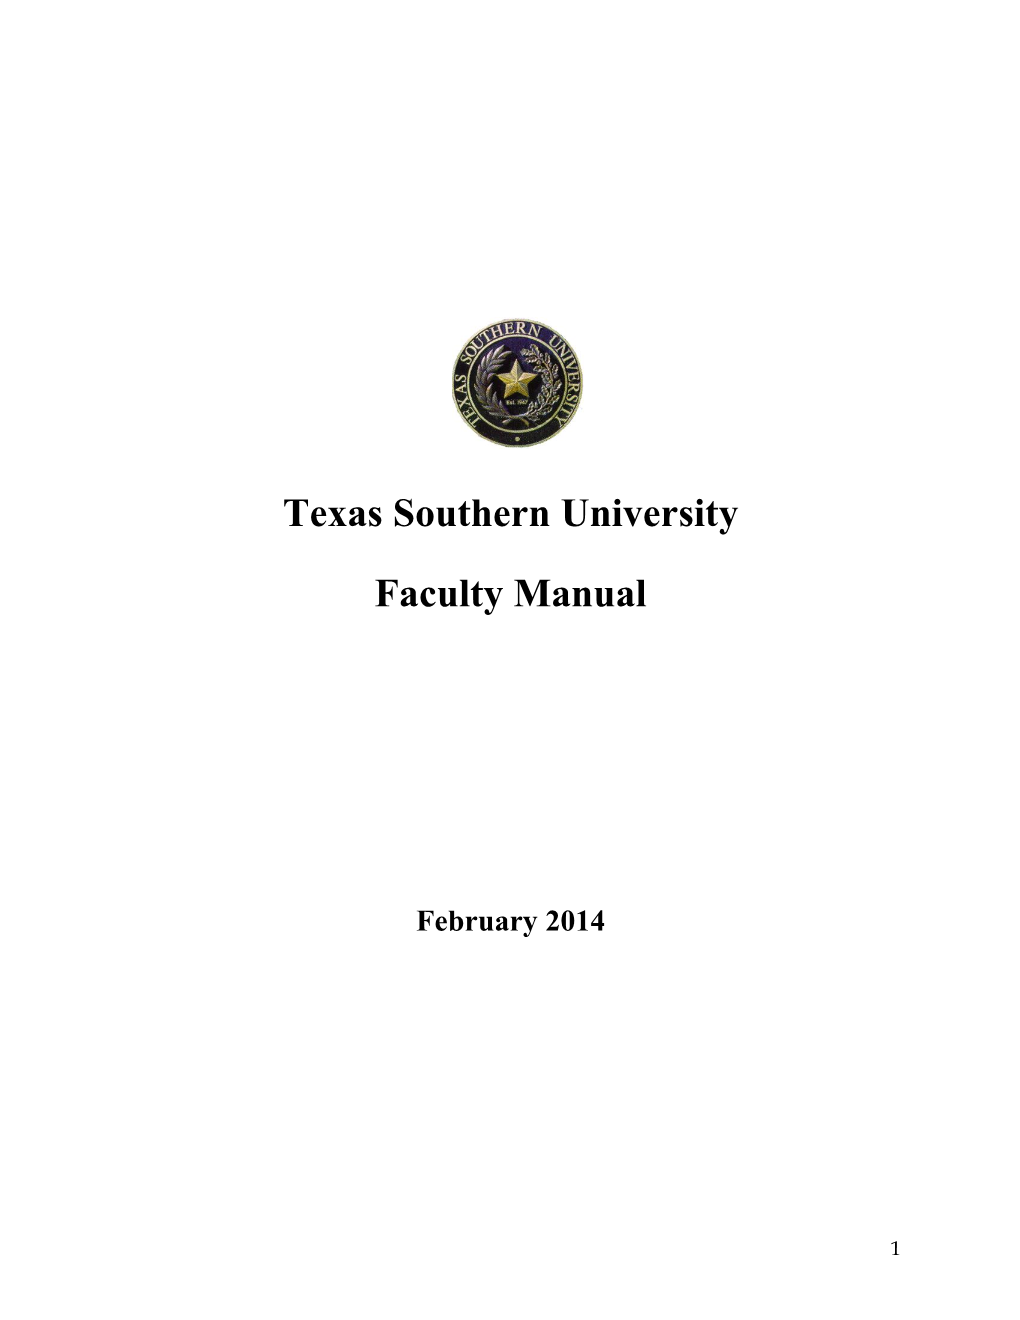 Texas Southern University Faculty Manual